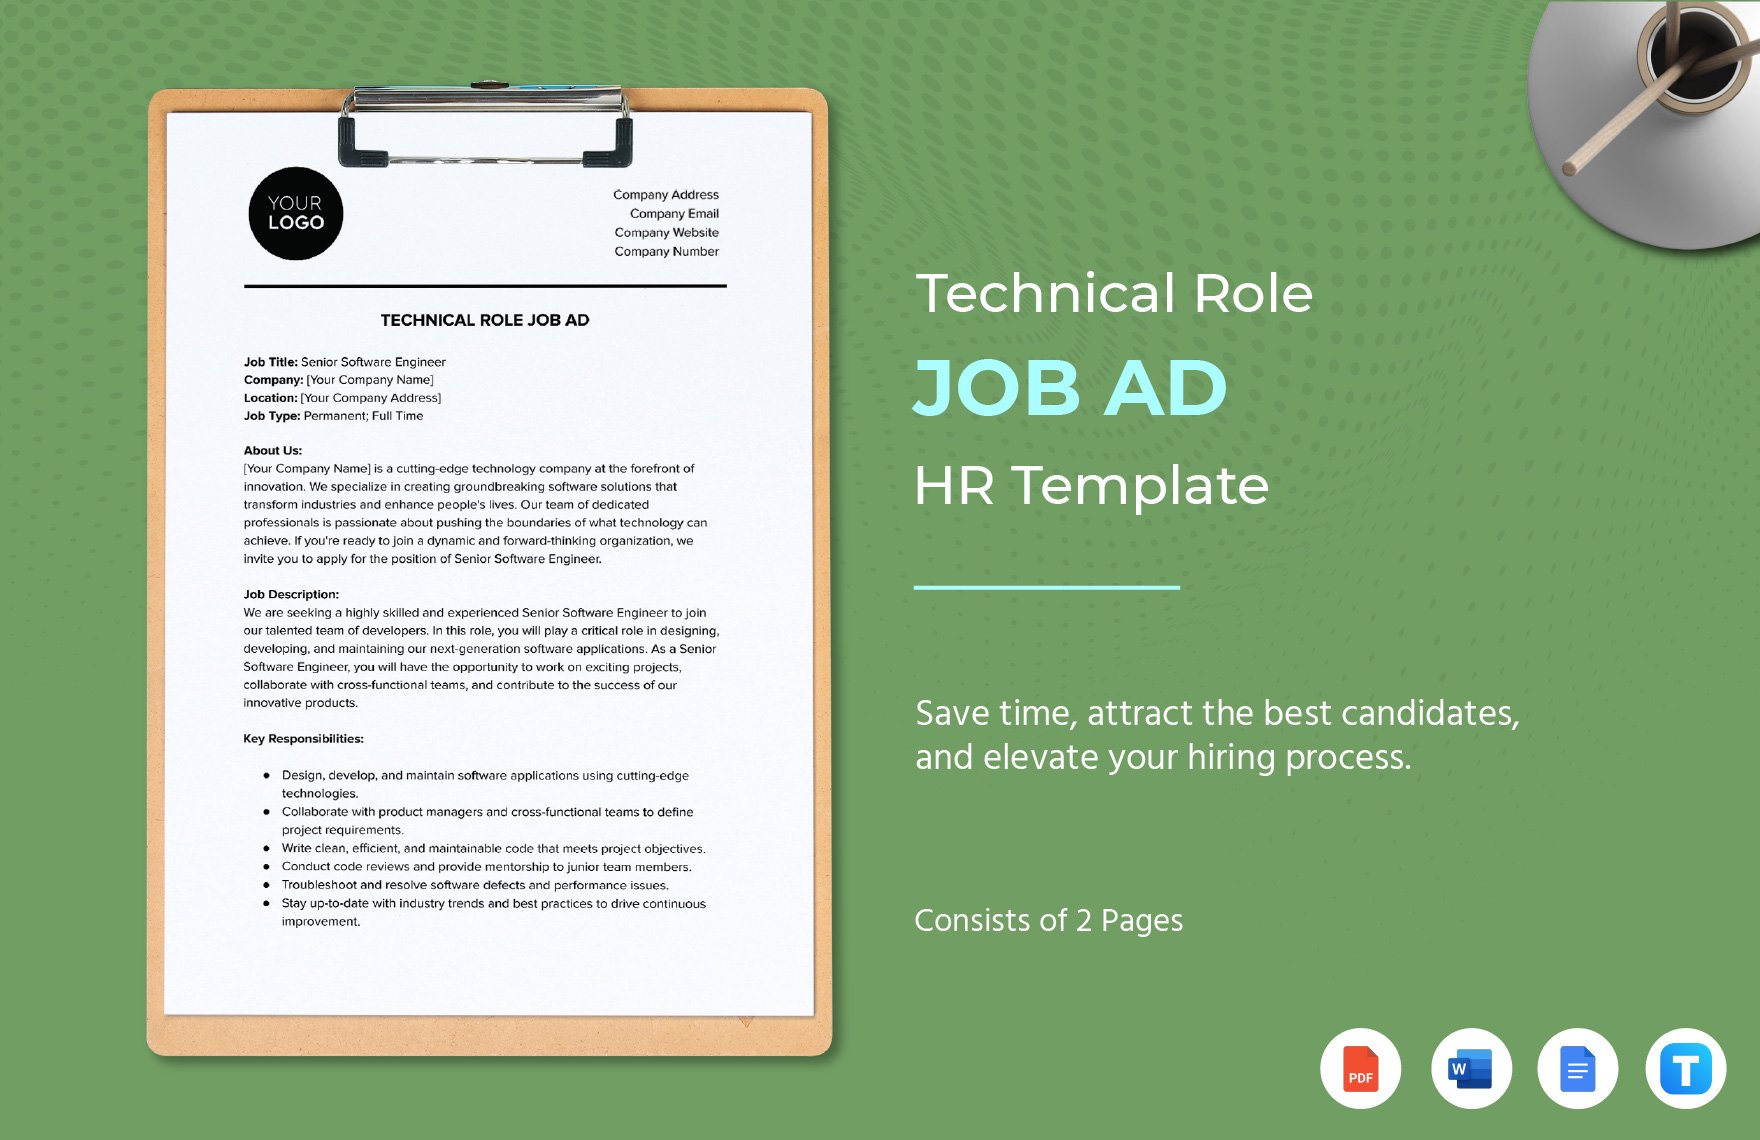 Technical Role Job Ad HR Template